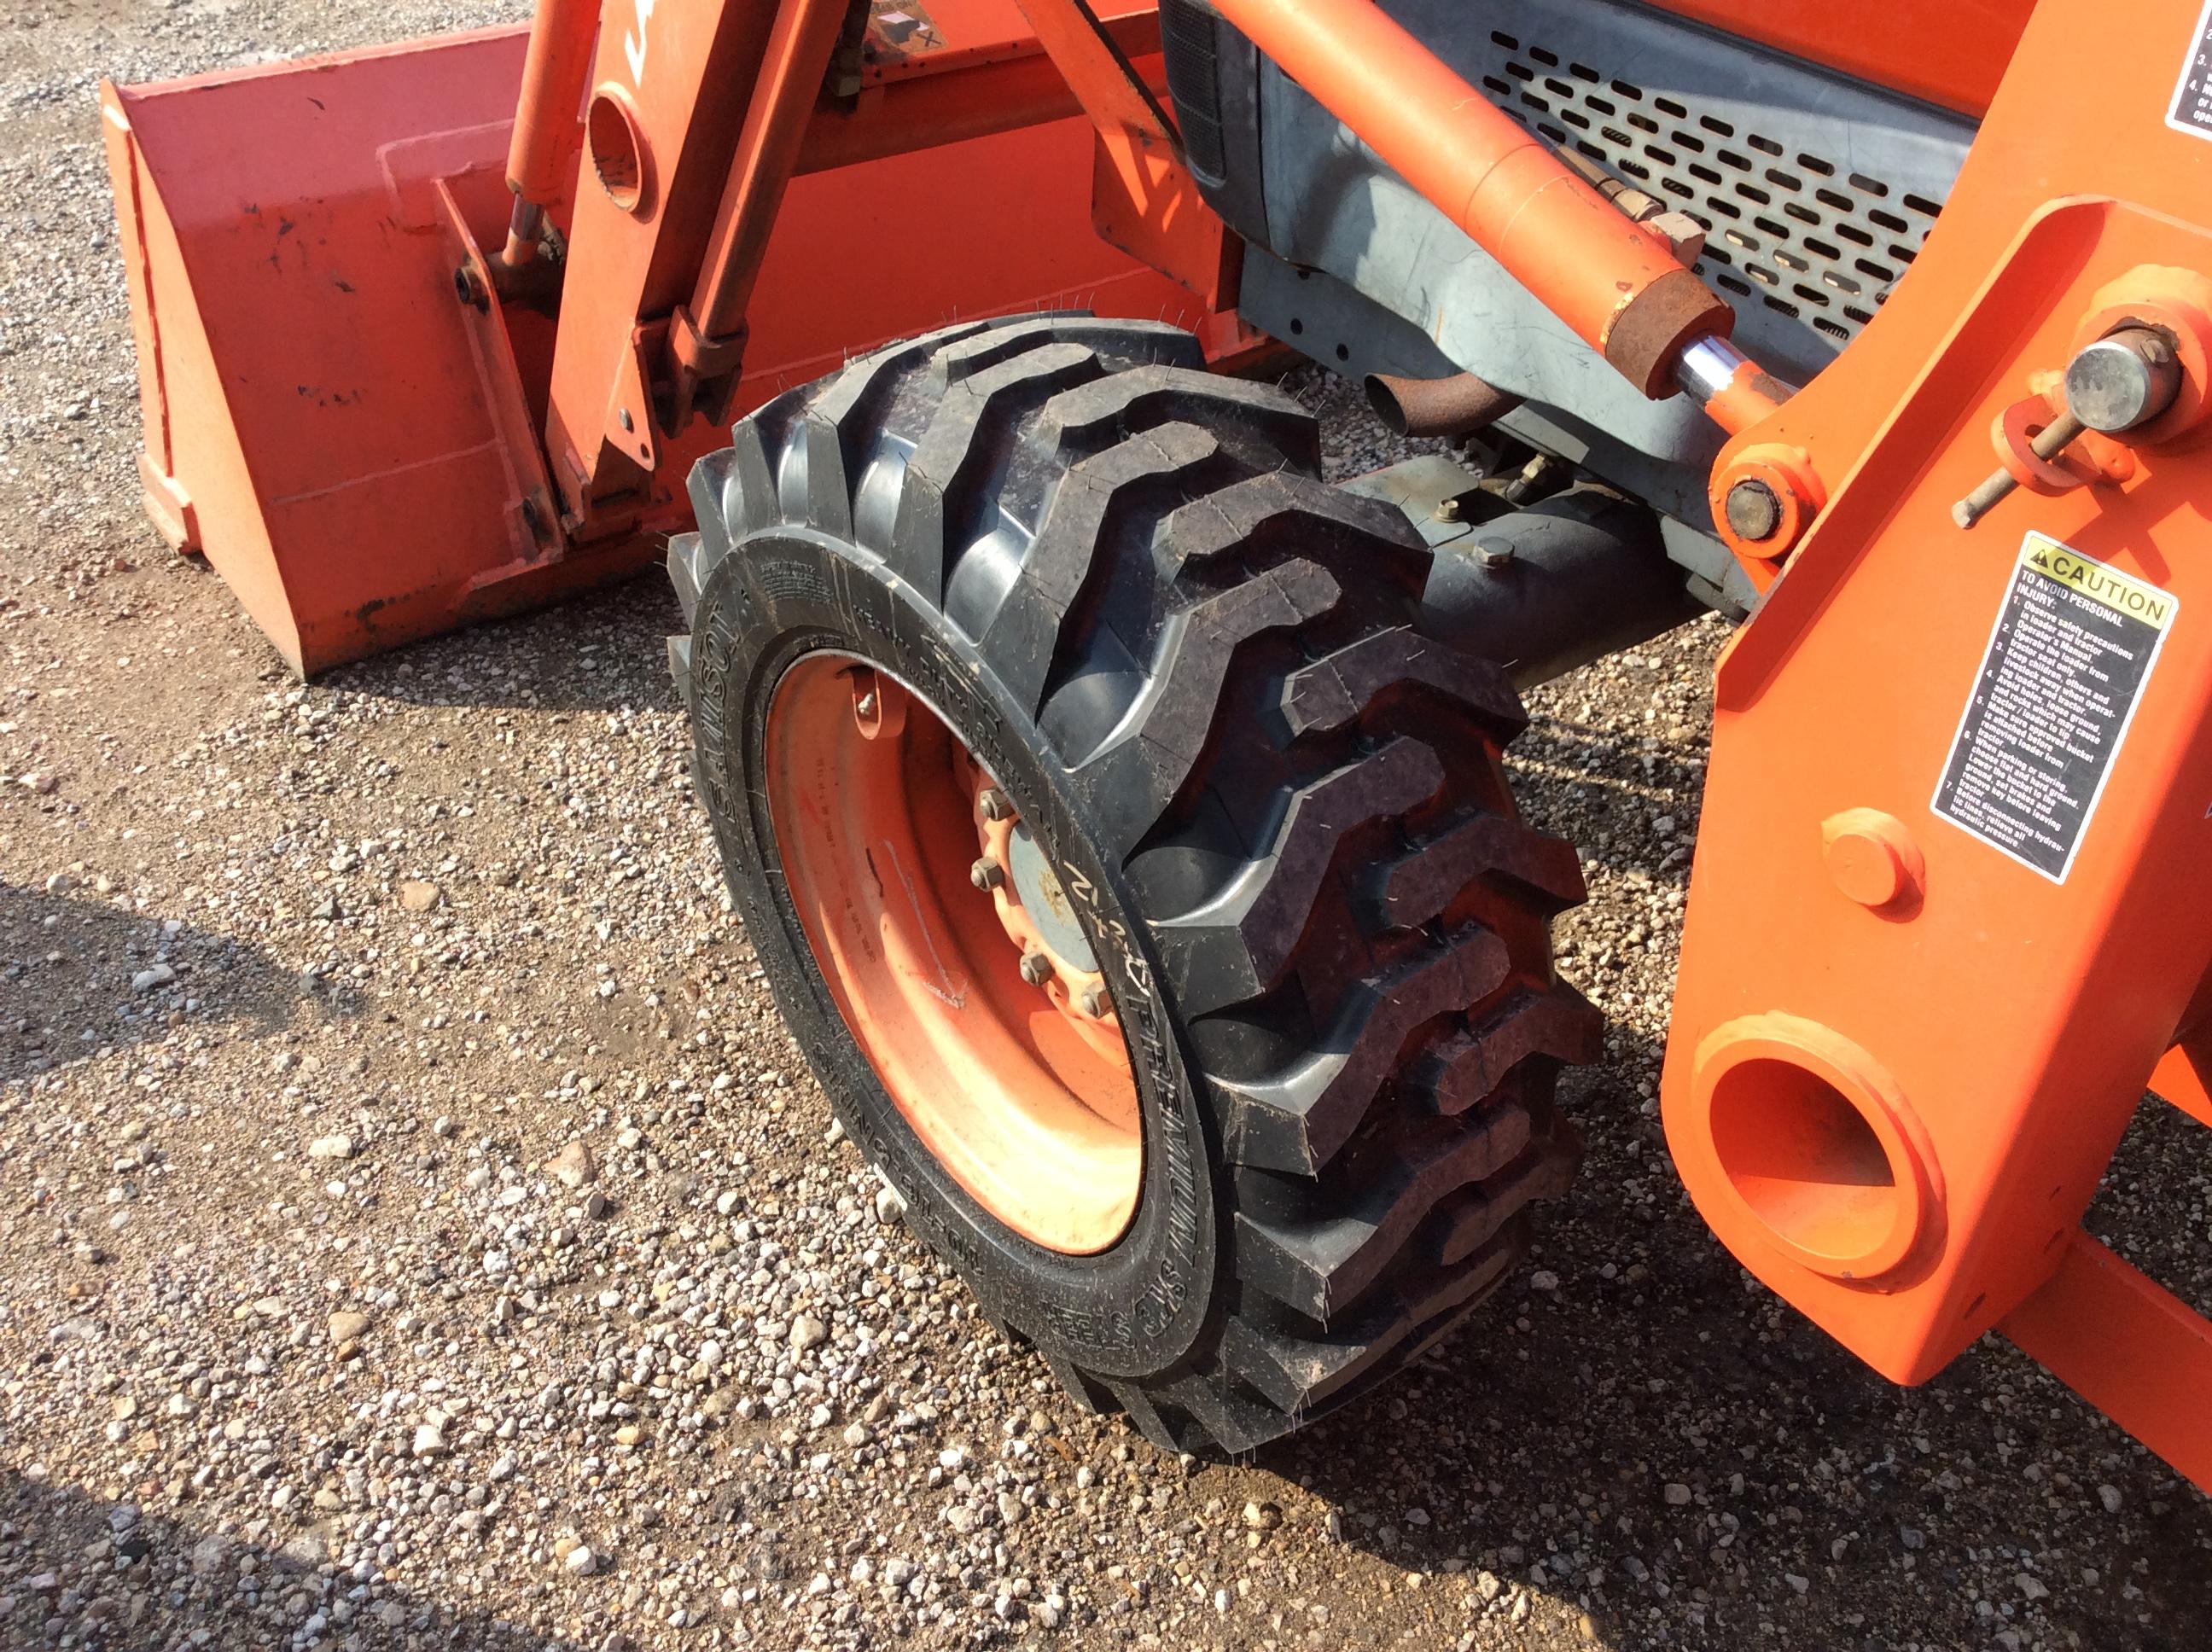 KUBOTA L3130D TRACTOR W/ KUBOTA LA513 LOADER (SERIAL # 32388) (SHOWING APPX 823 HOURS, UP TO THE BUY